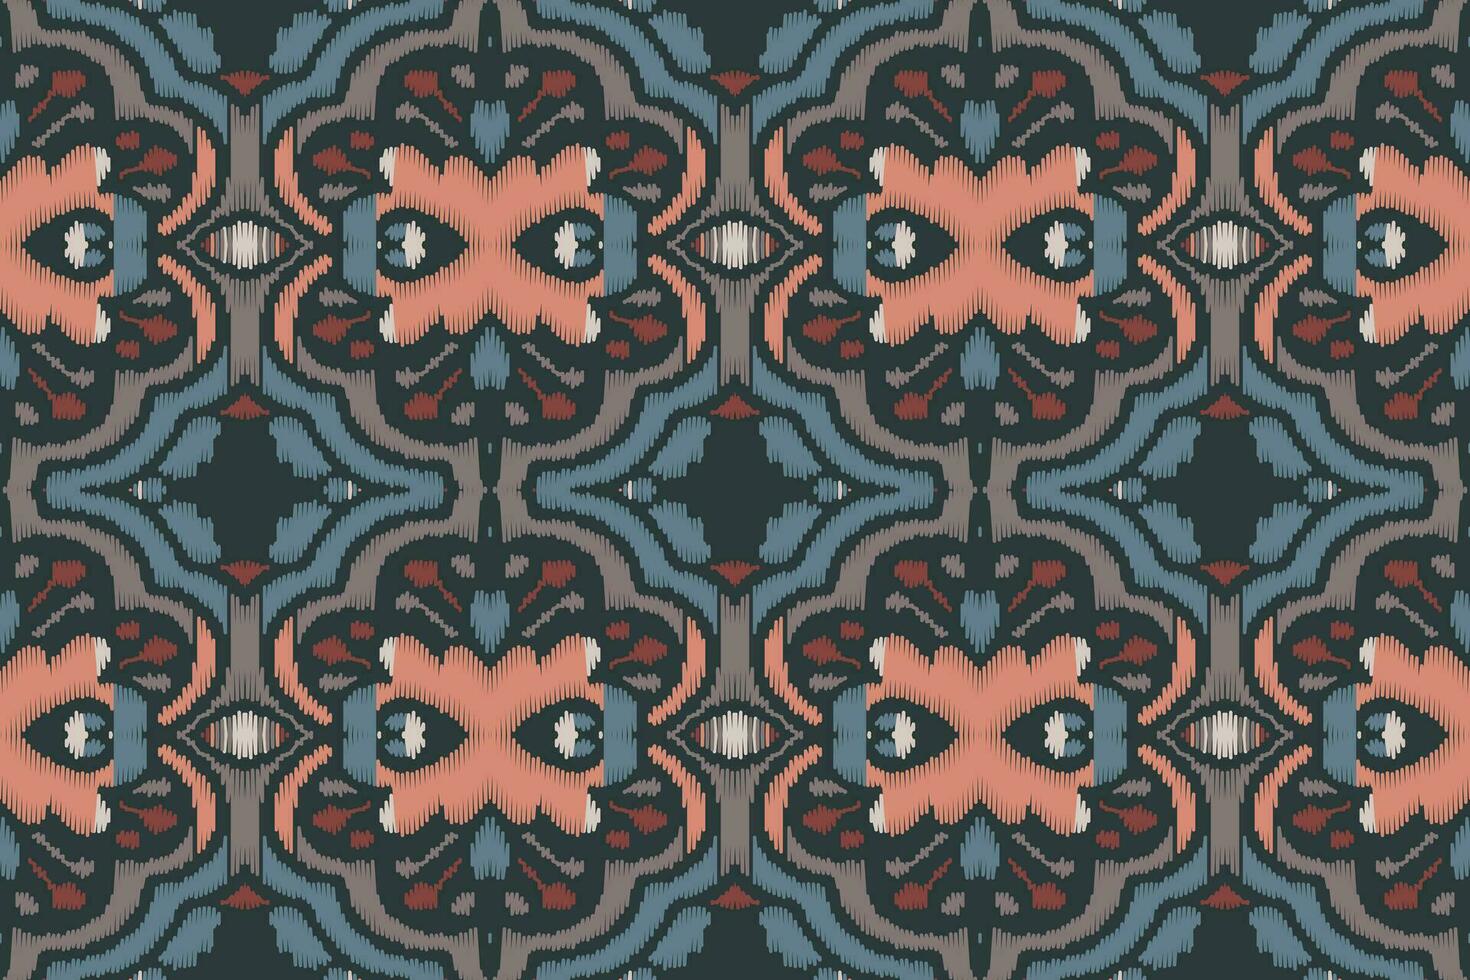 Ikat Damask Paisley Embroidery Background. Ikat Prints Geometric Ethnic Oriental Pattern Traditional. Ikat Aztec Style Abstract Design for Print Texture,fabric,saree,sari,carpet. vector